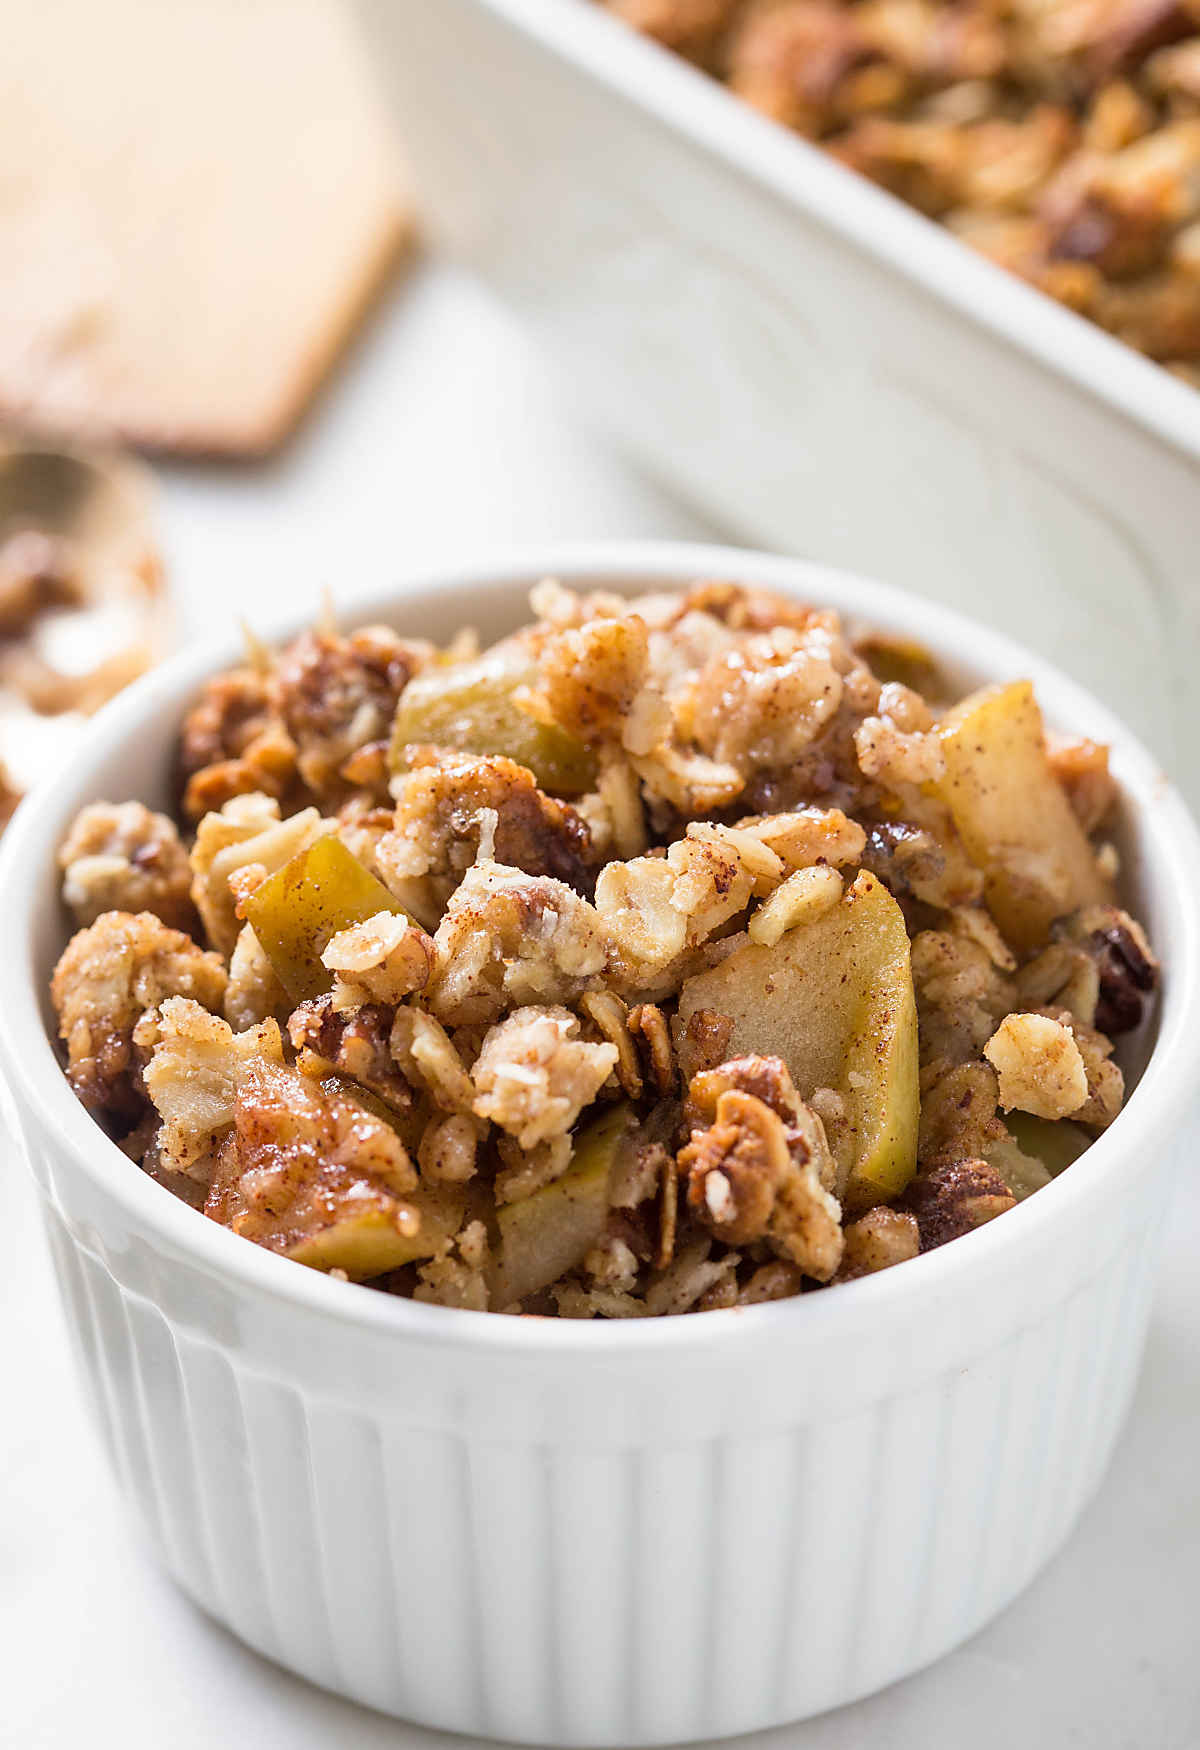 This easy and healthy apple crisp recipe is perfect for enjoying dessert guilt-free. No one will notice that it is skinny with no butter and white sugar.